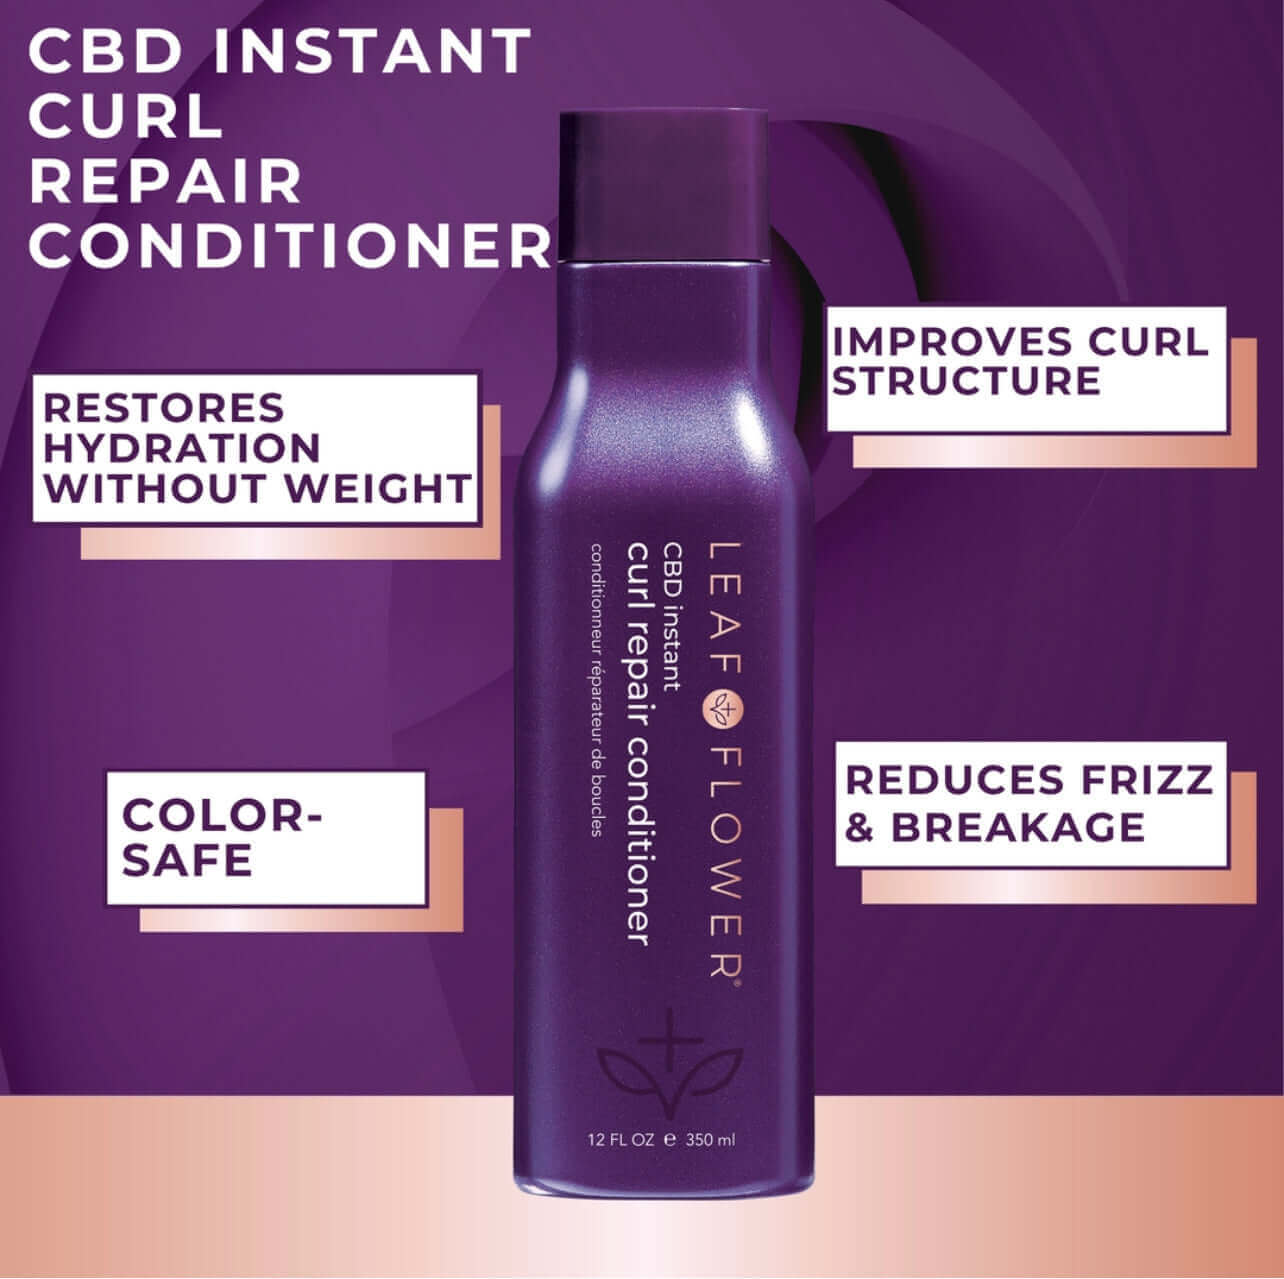 A graphic featuring a purple bottle of Leaf & Flower cbd-infused curl shampoo, highlighting benefits such as restoring hydration without weight, improving curl structure, being color-safe, and reducing frizz.